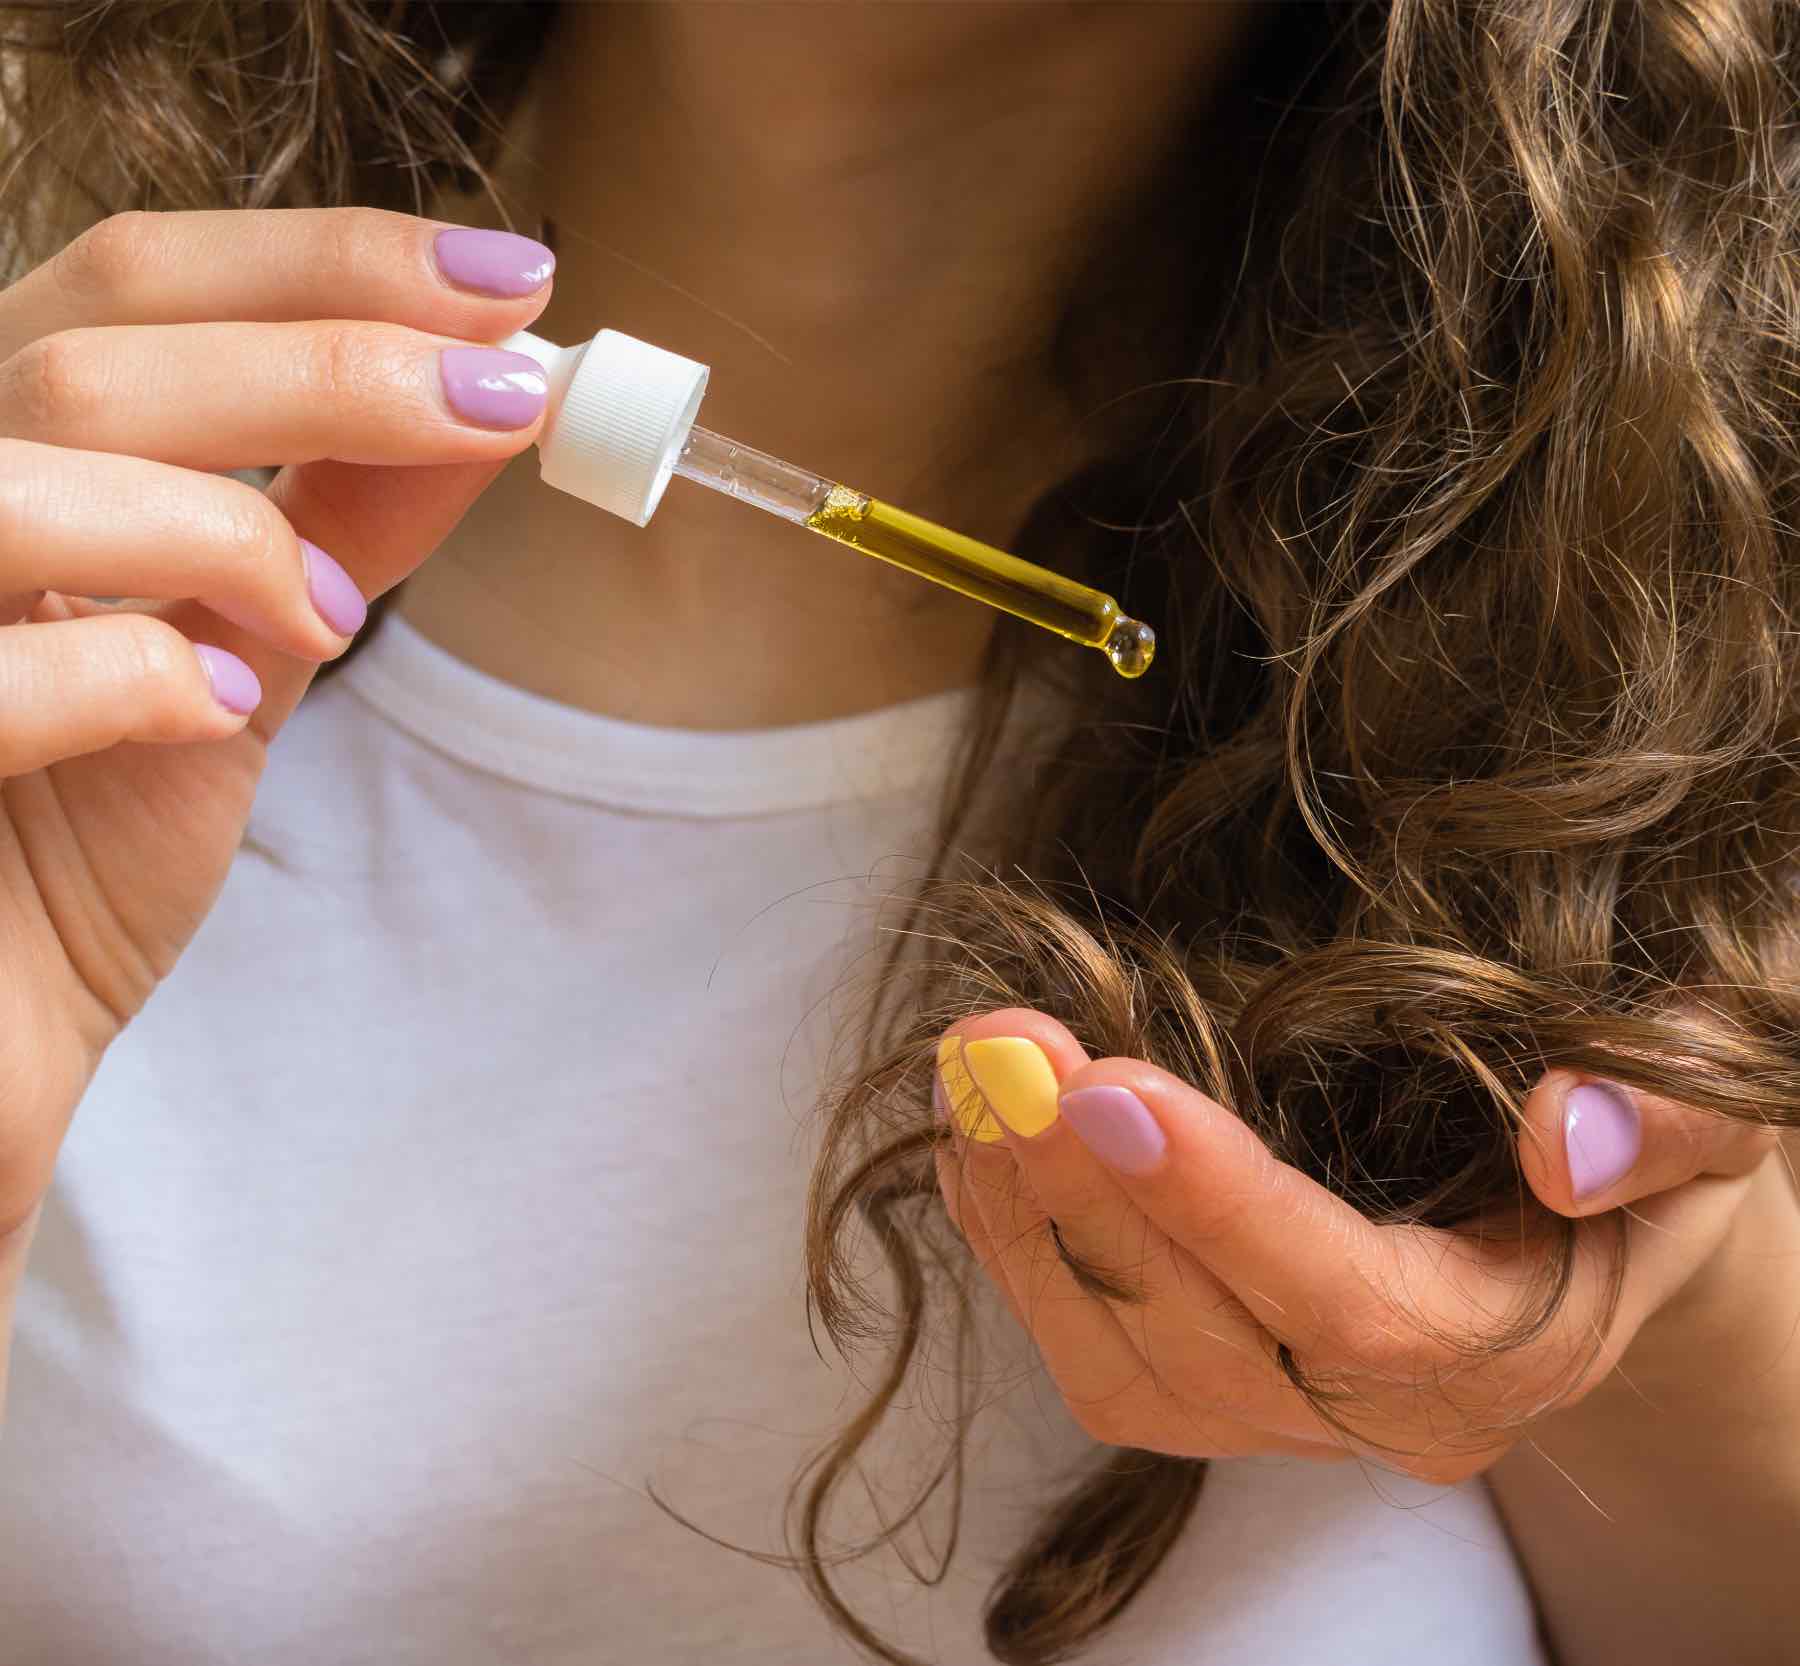 Using a hair oil can help strengthen your hair - call Lemon Tree for recommendations.